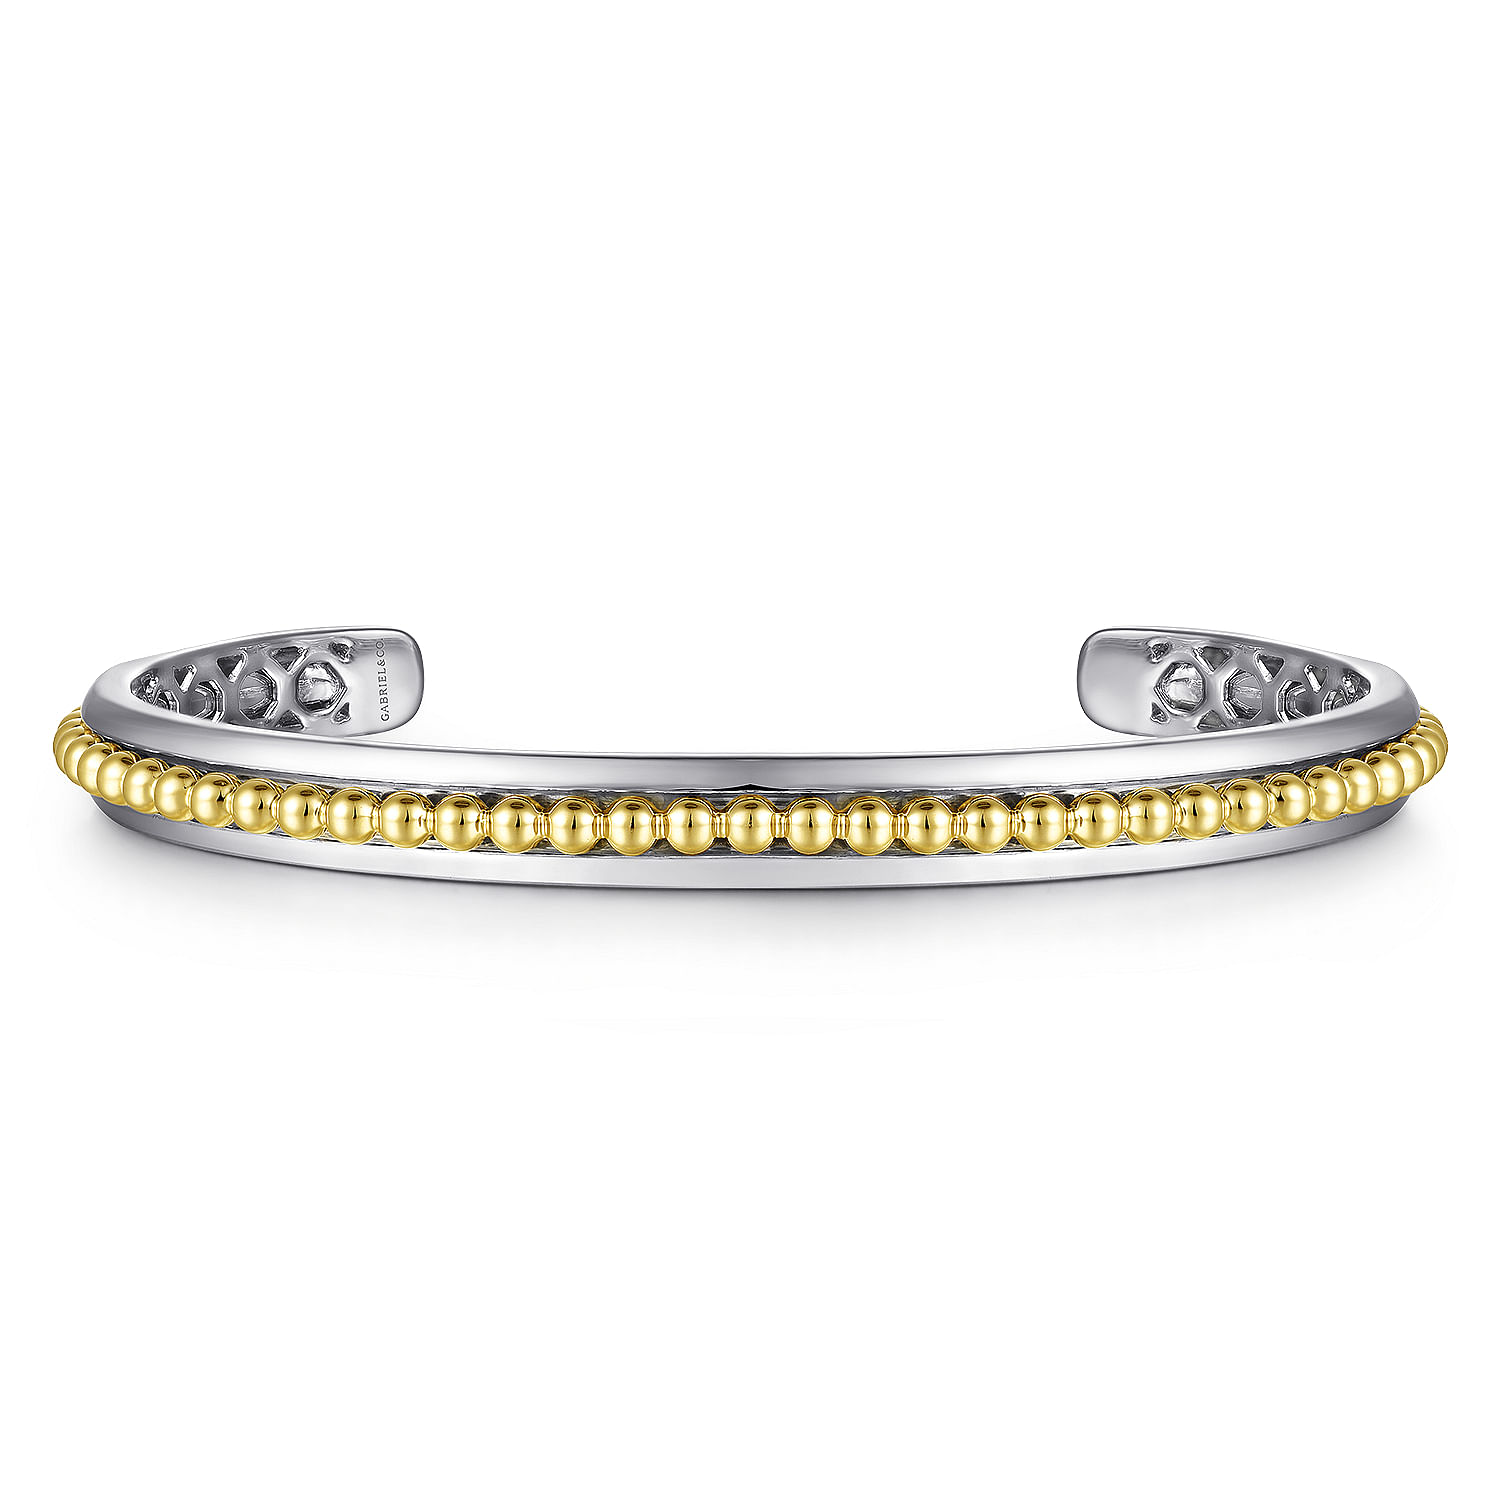 Sterling Silver Open Cuff Bracelet with 14K Yellow Gold Beads